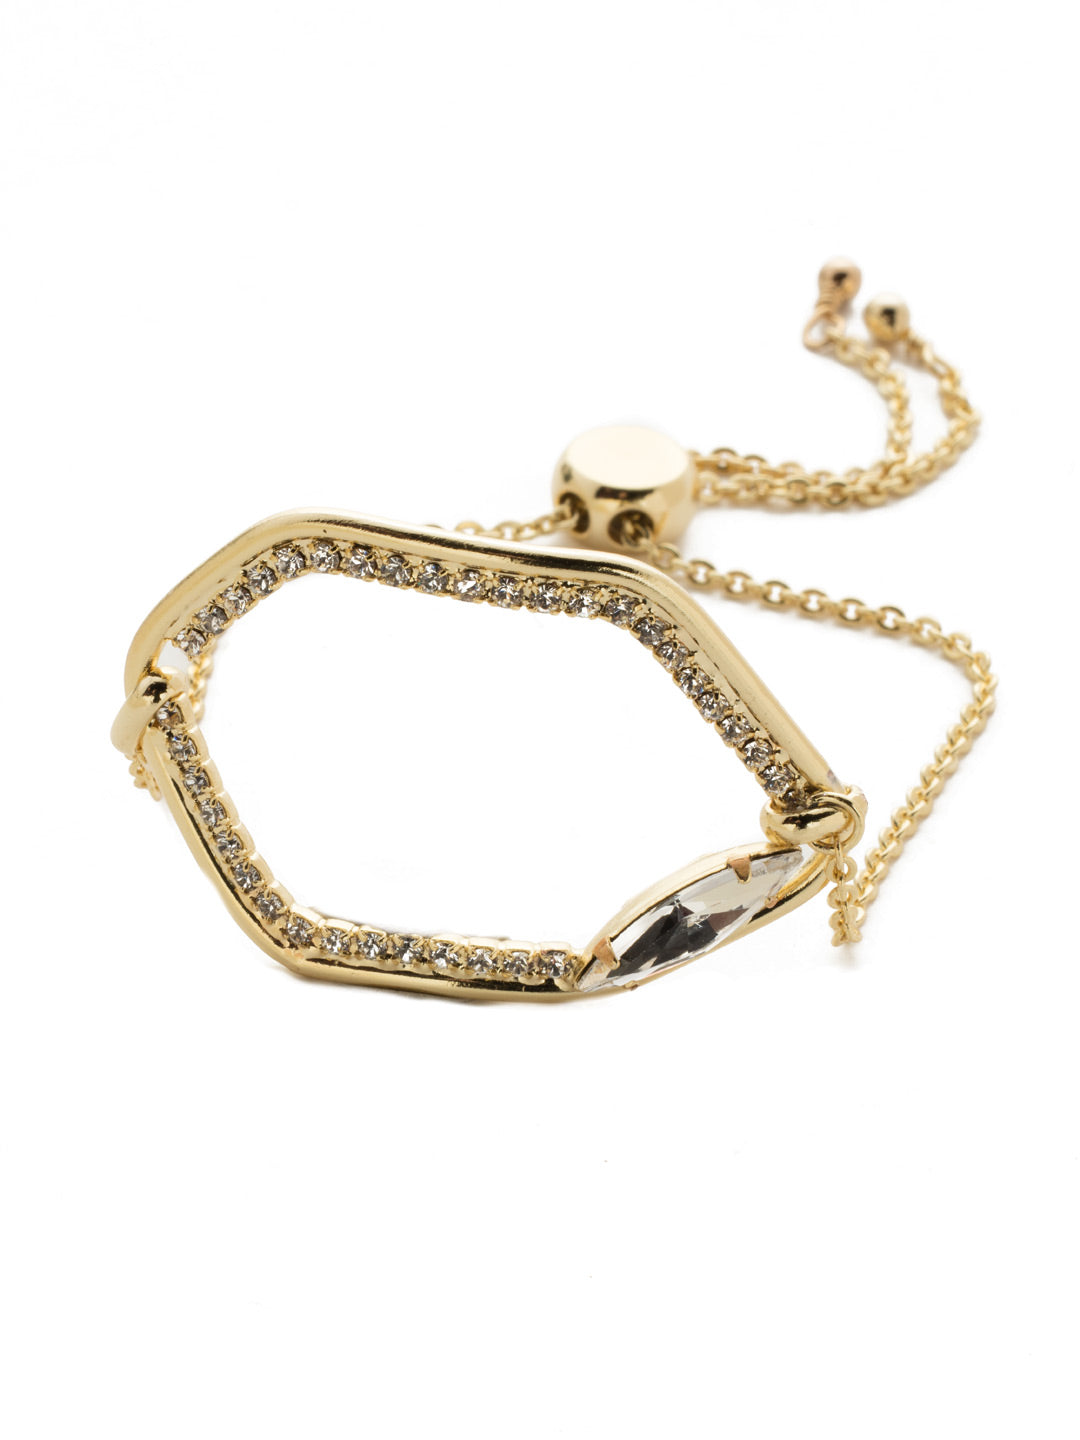 Demetria Layered Slider Bracelet - BEH28BGCRY - <p>Don't be shy. Slide on this classic bracelet stunner and make a statement. Its unique shape completely lined in crystals and accented with a navette stone demands to be noticed. Slider bracelet closure. From Sorrelli's Crystal collection in our Bright Gold-tone finish.</p>